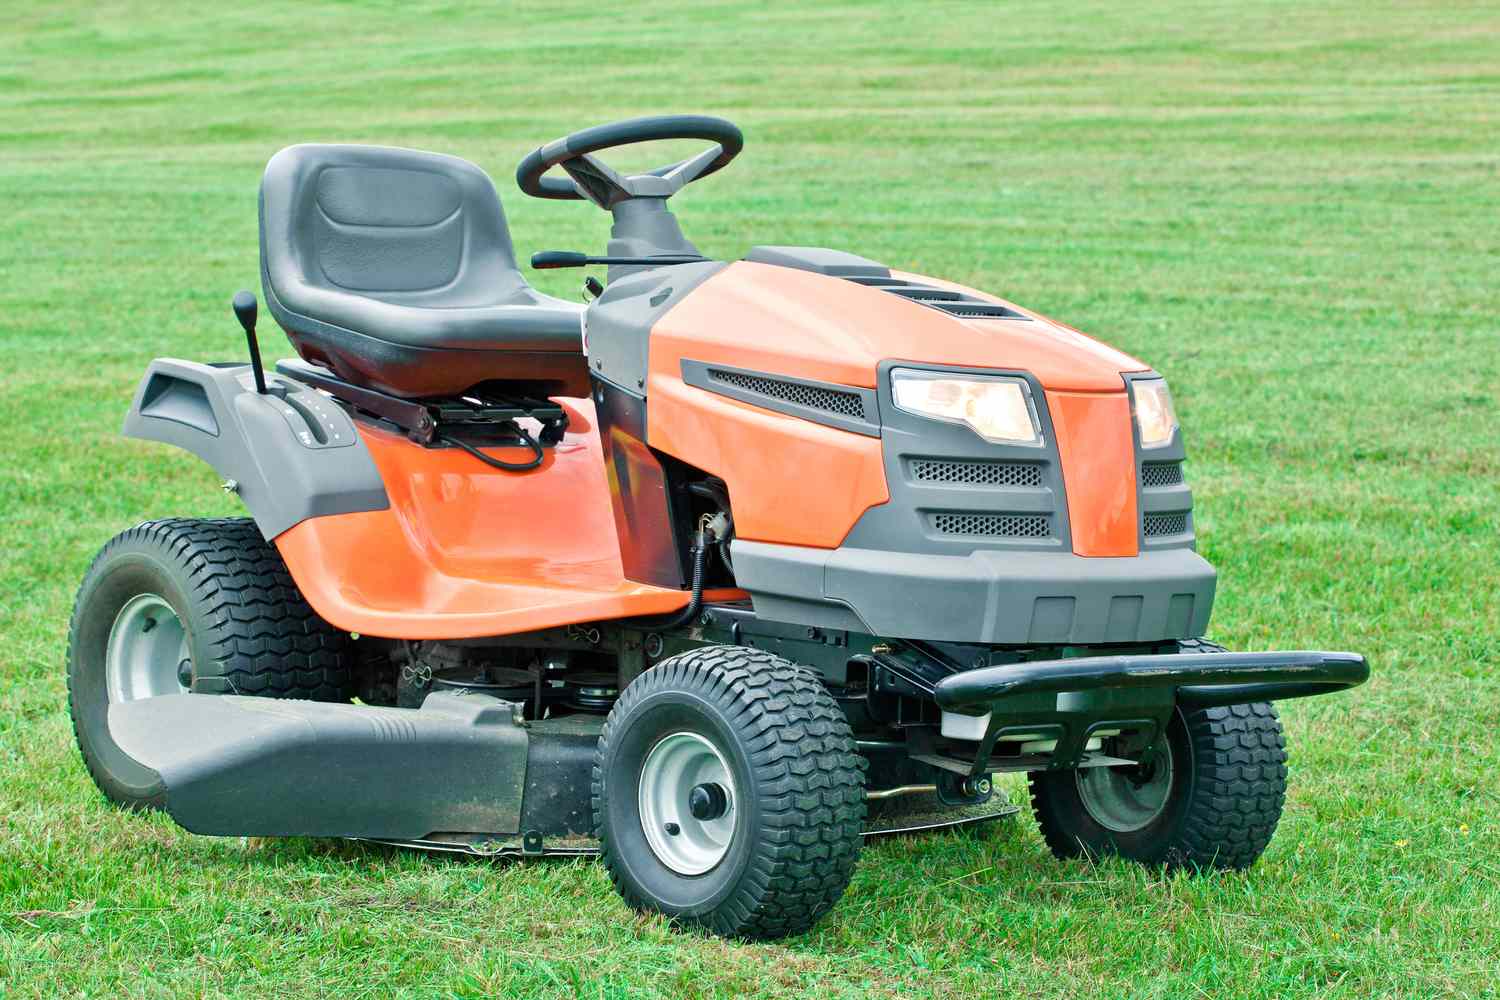 A riding lawn tractor